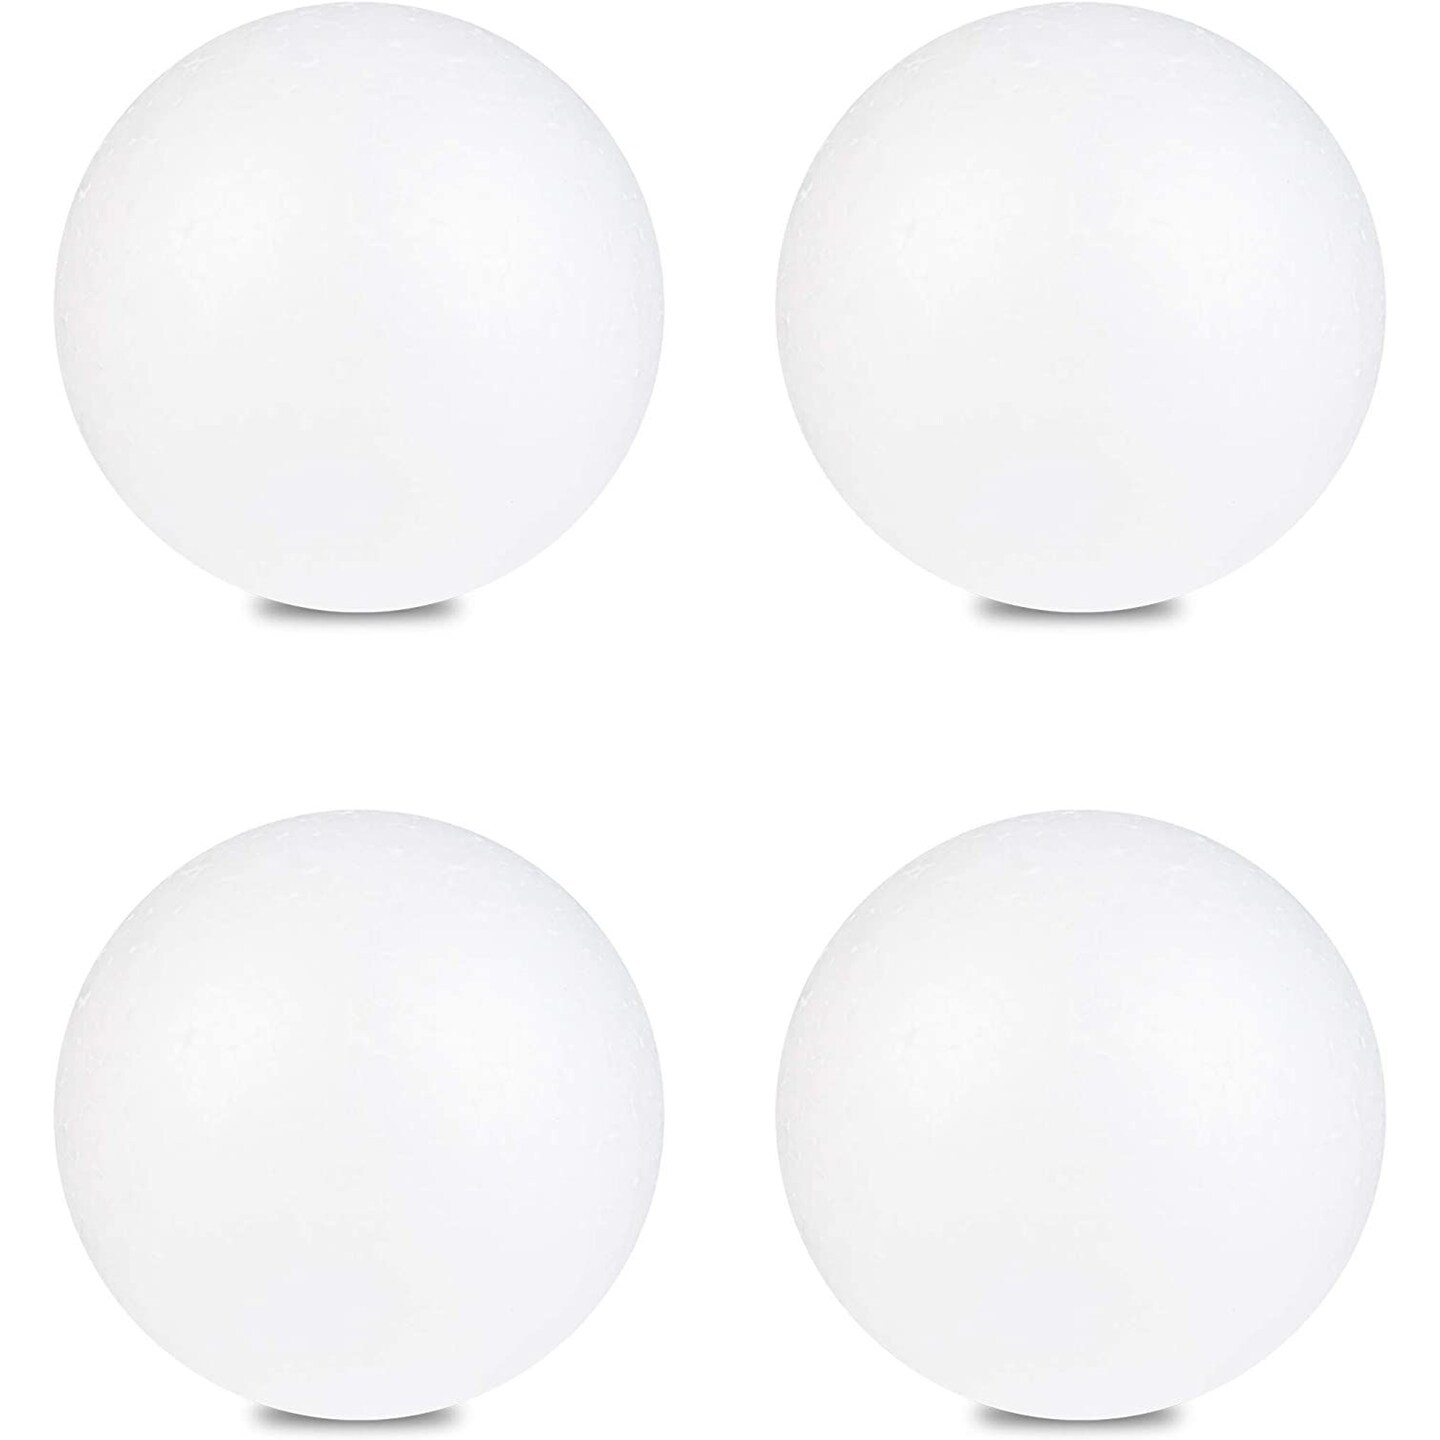 5 Inch Foam Balls for Crafts - 4 Pack Solid Round White Polystyrene Spheres  for Ornaments, DIY Projects, Craft Modeling